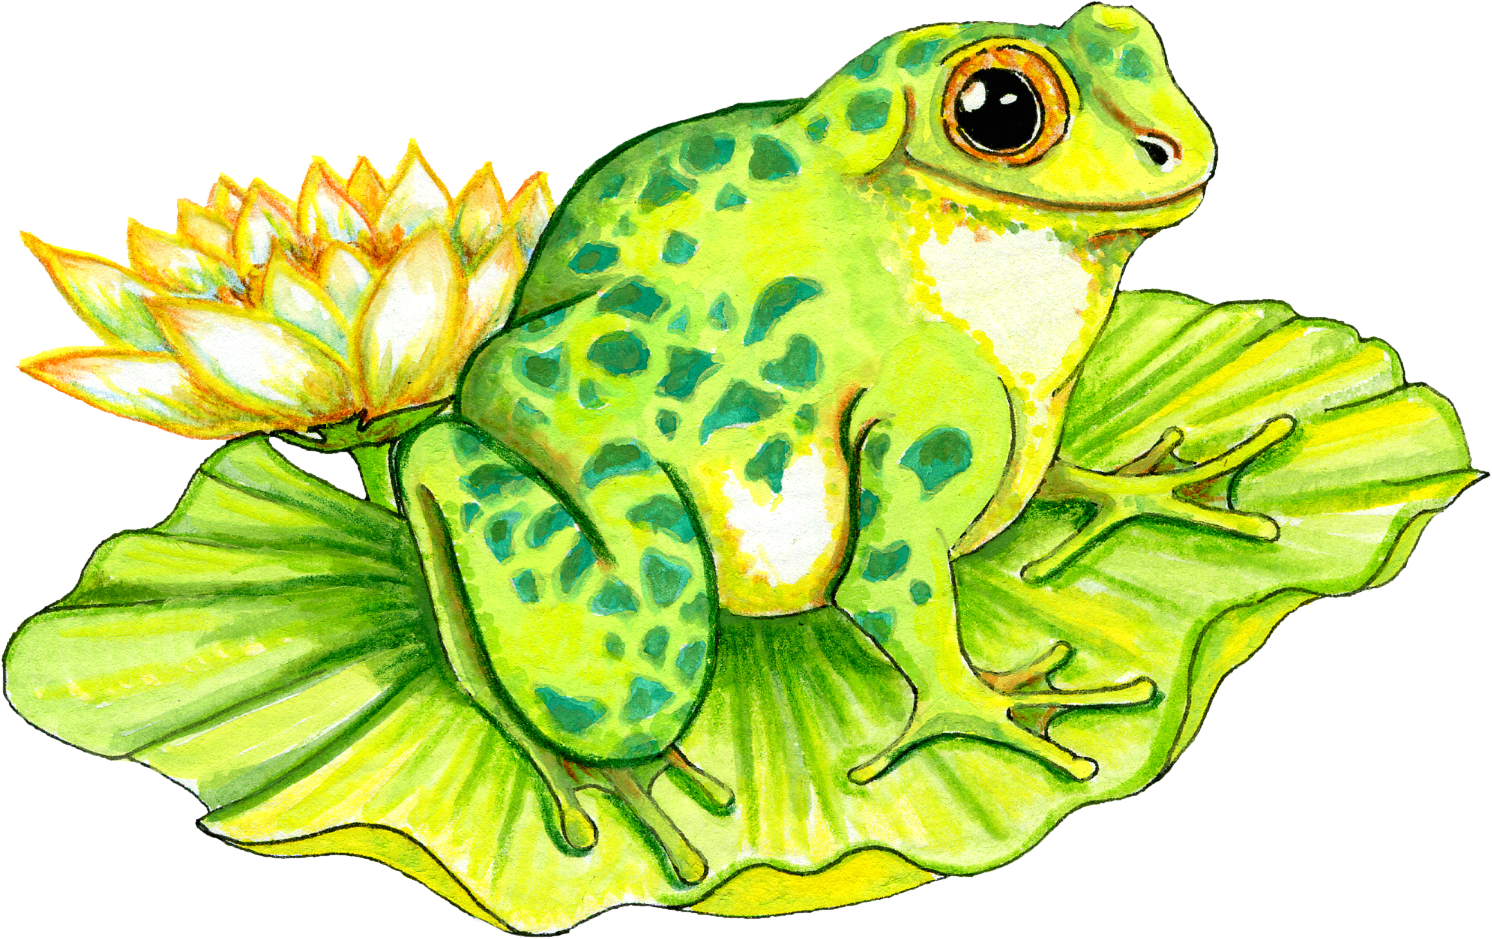 Frog On Lily Pad PNG HD - 129855